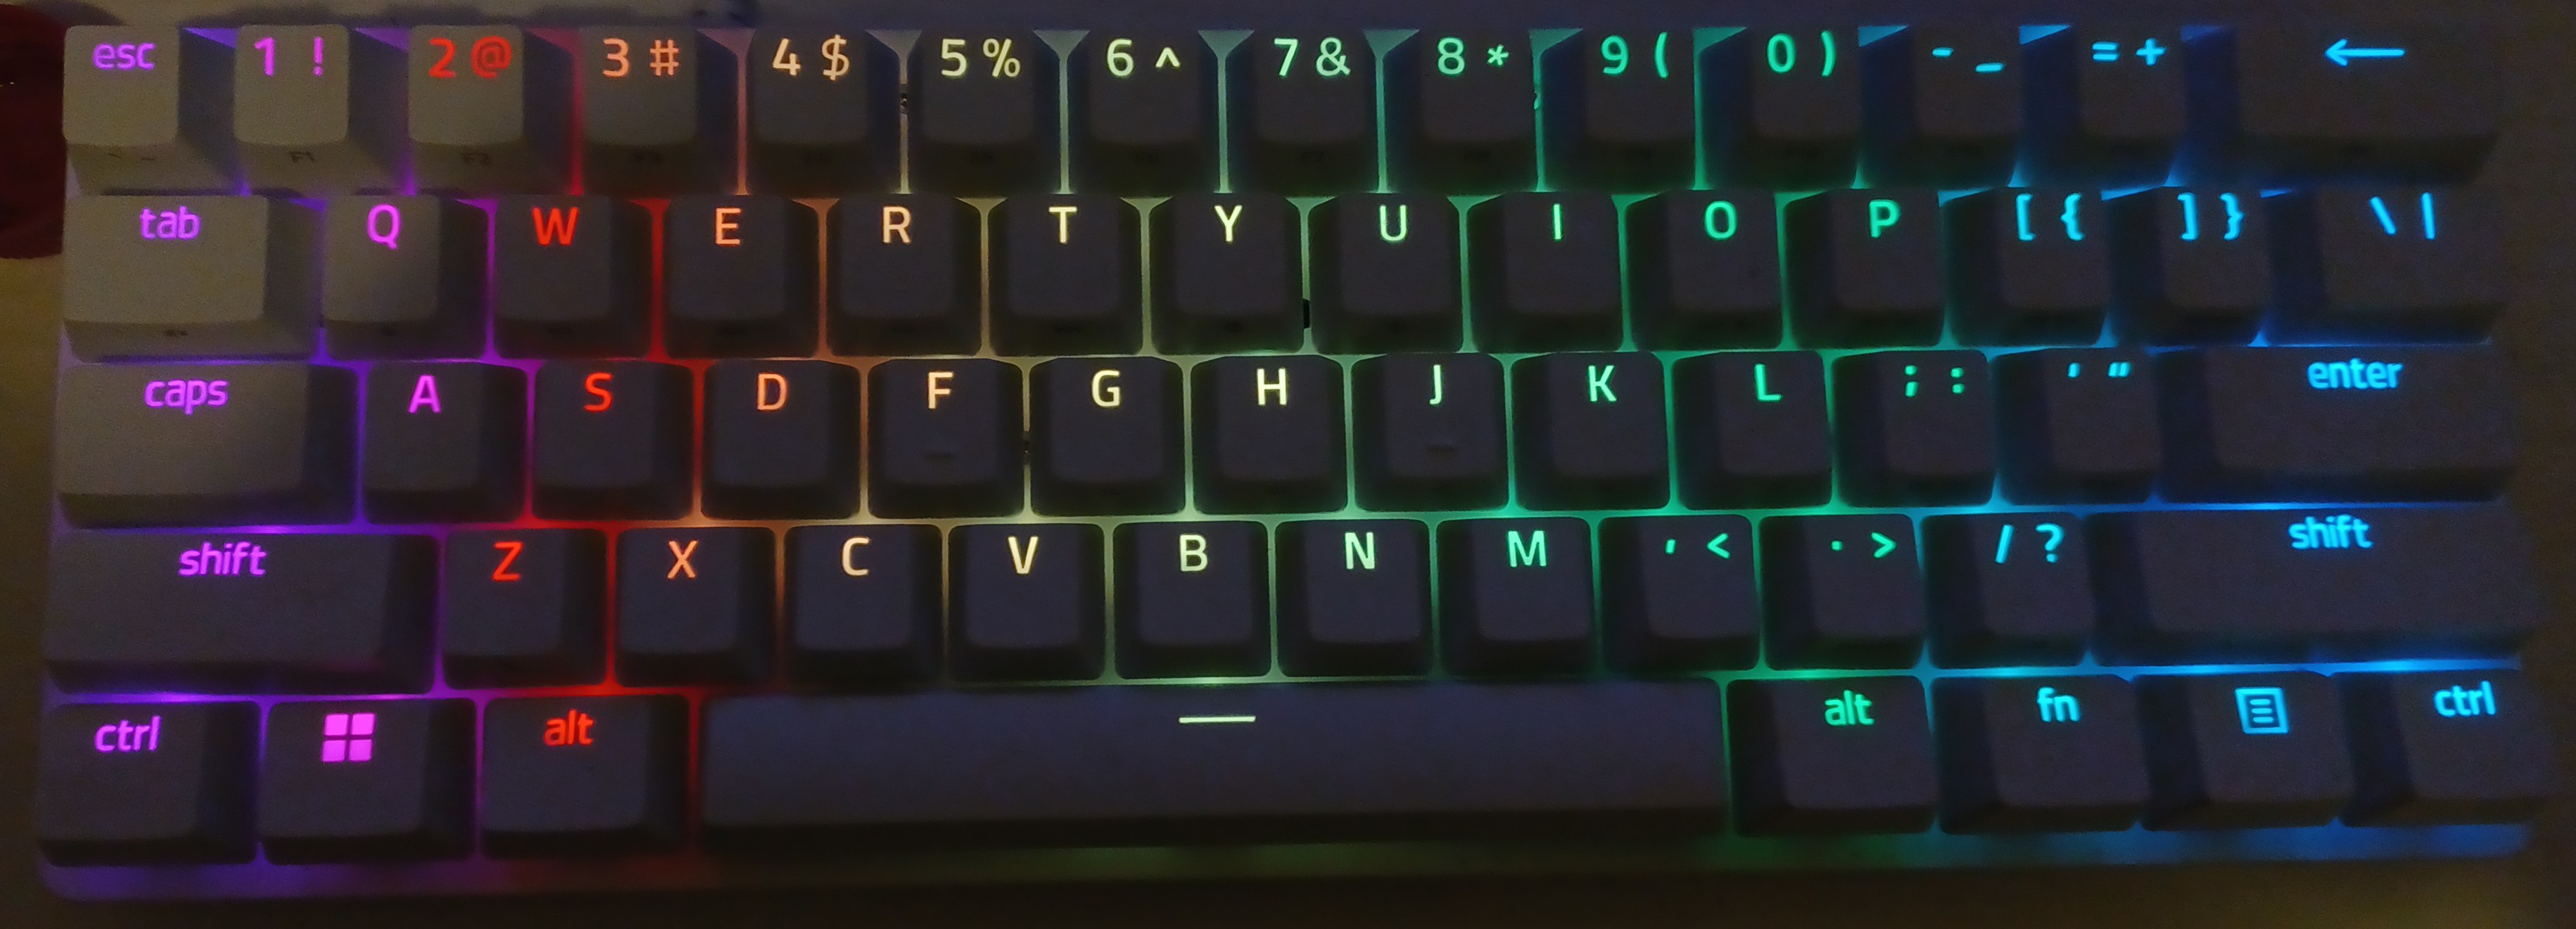 a photo of a razer huntsman mini keyboard, in white with RGB backlighting. the photo is dark to accentuate the color of the lights.